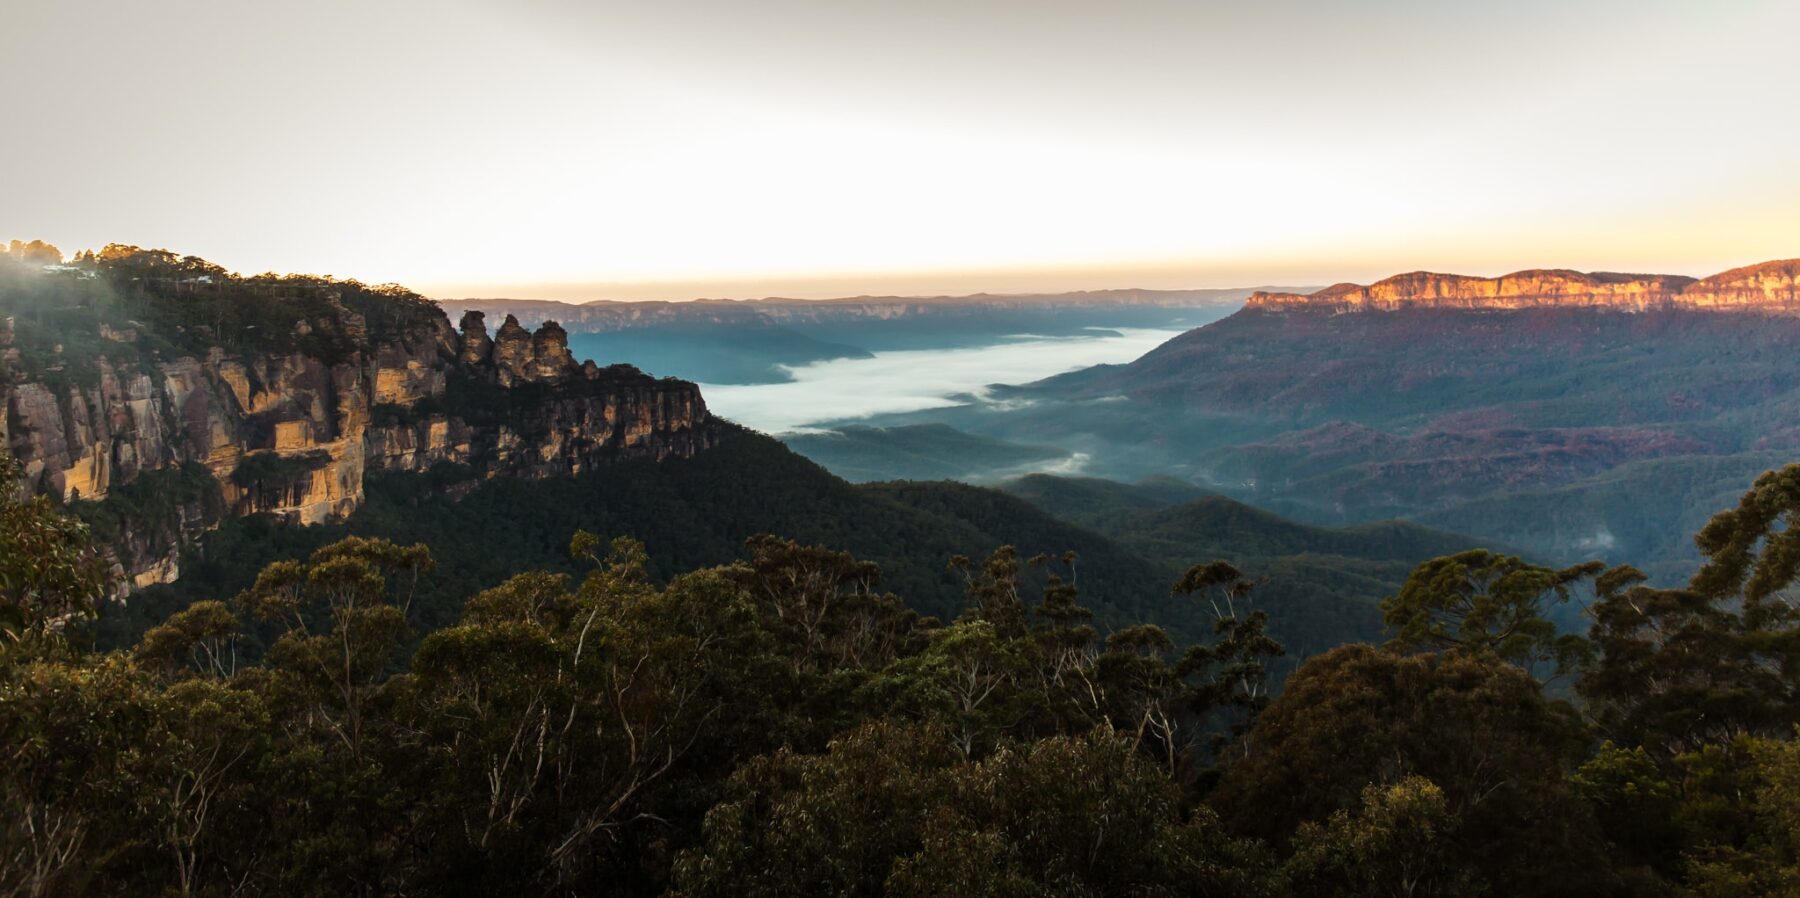 Scenic World: The record-breaking attraction with serious sustainable credentials